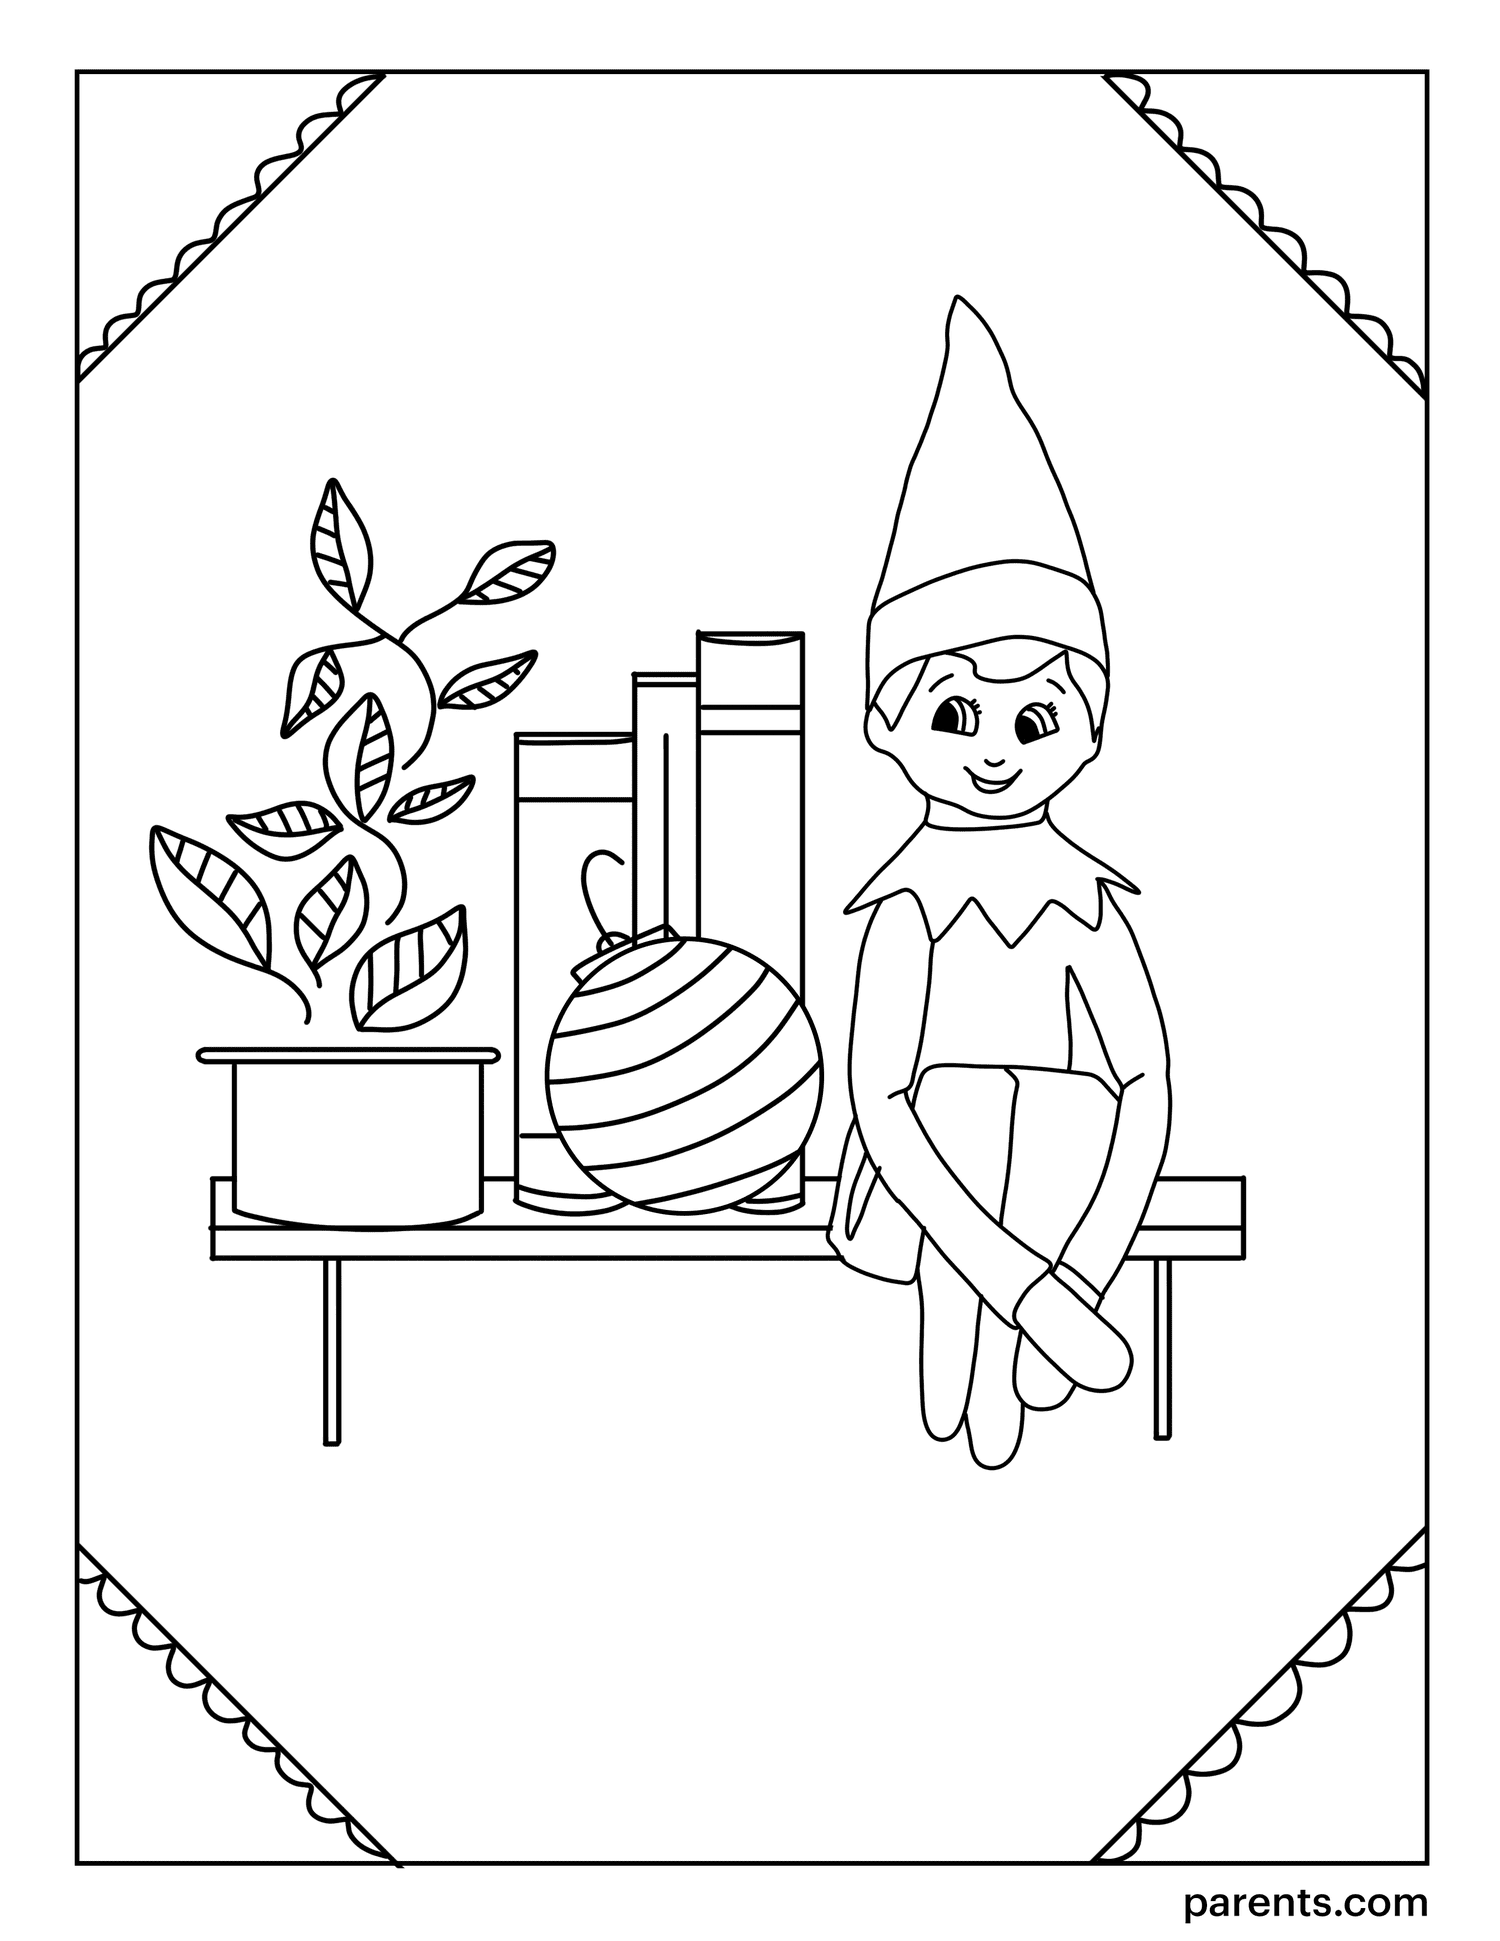 Christmas Coloring Pages Elf On The Shelf – Best Wallpaper and Coloring